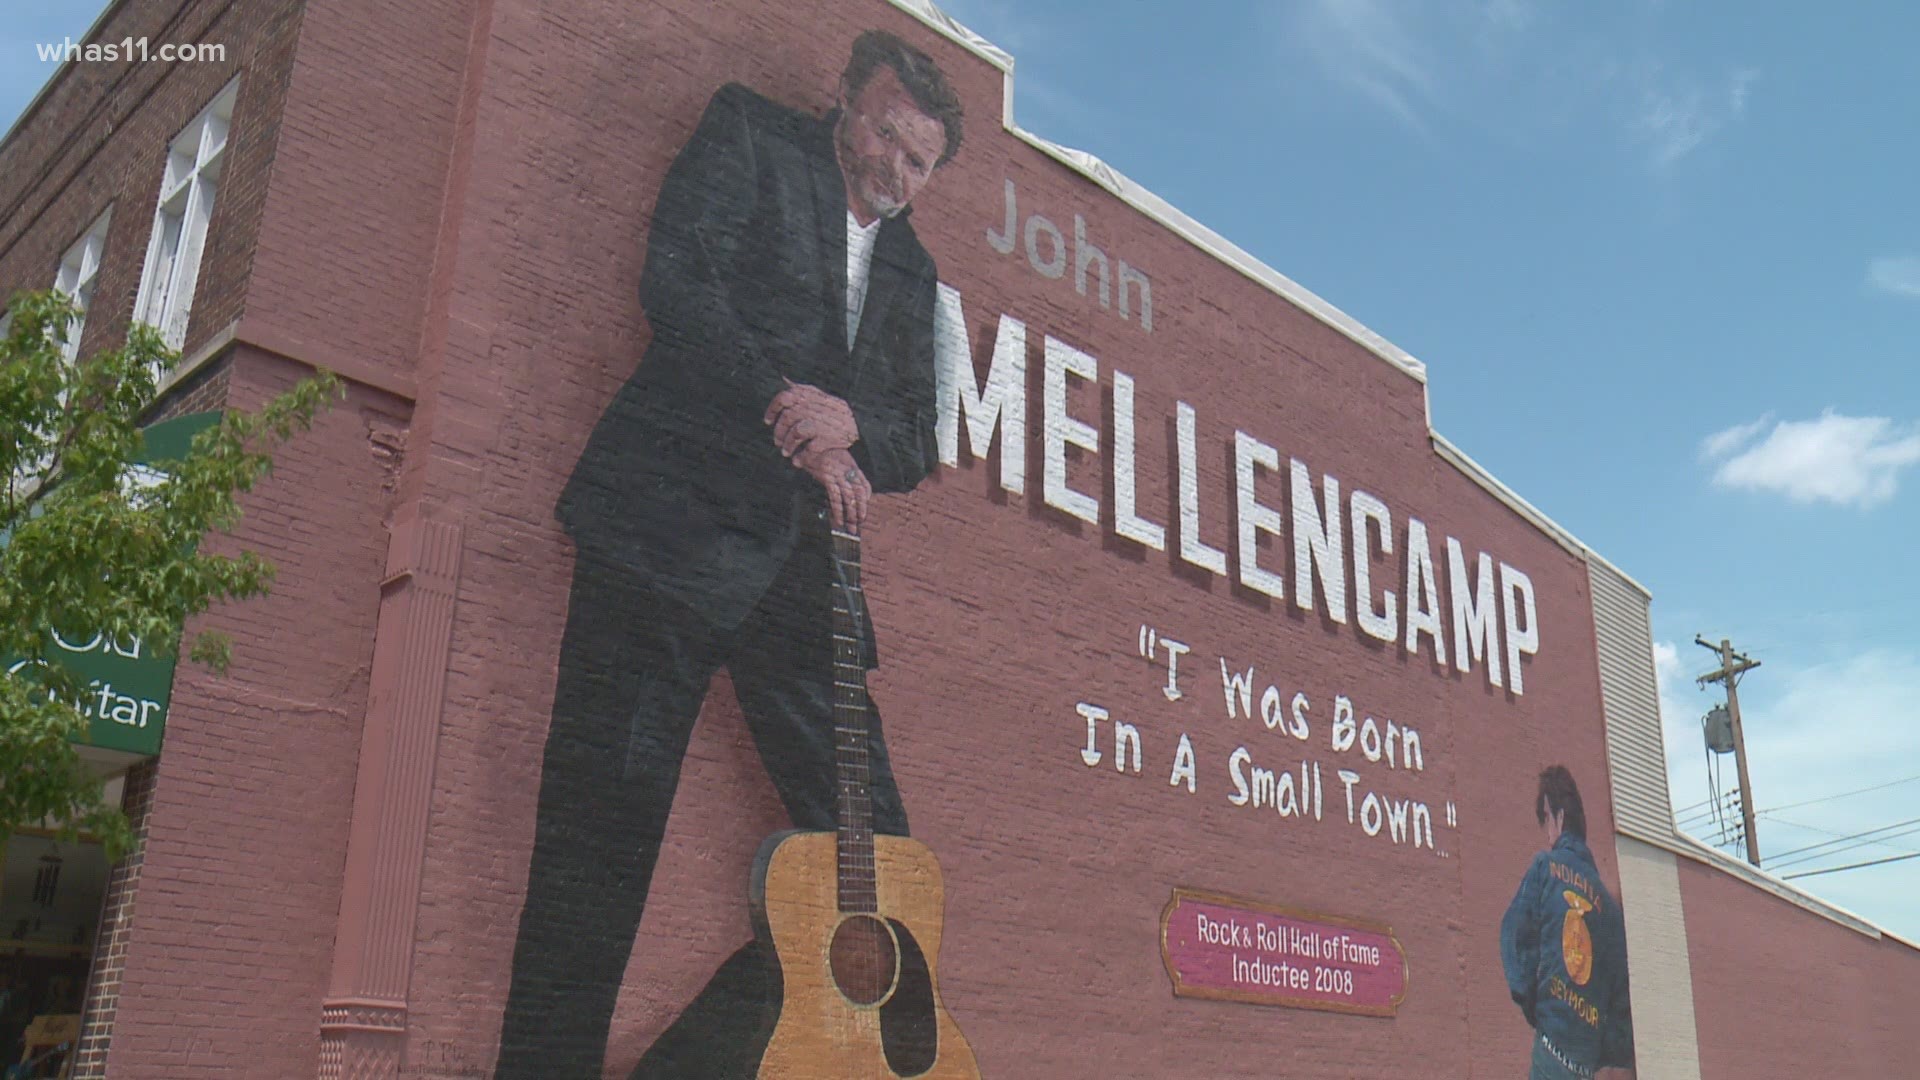 The project is the result of a $50,000 donation from the Mellencamp family and was a partnership between the city and Seymour Main Street.